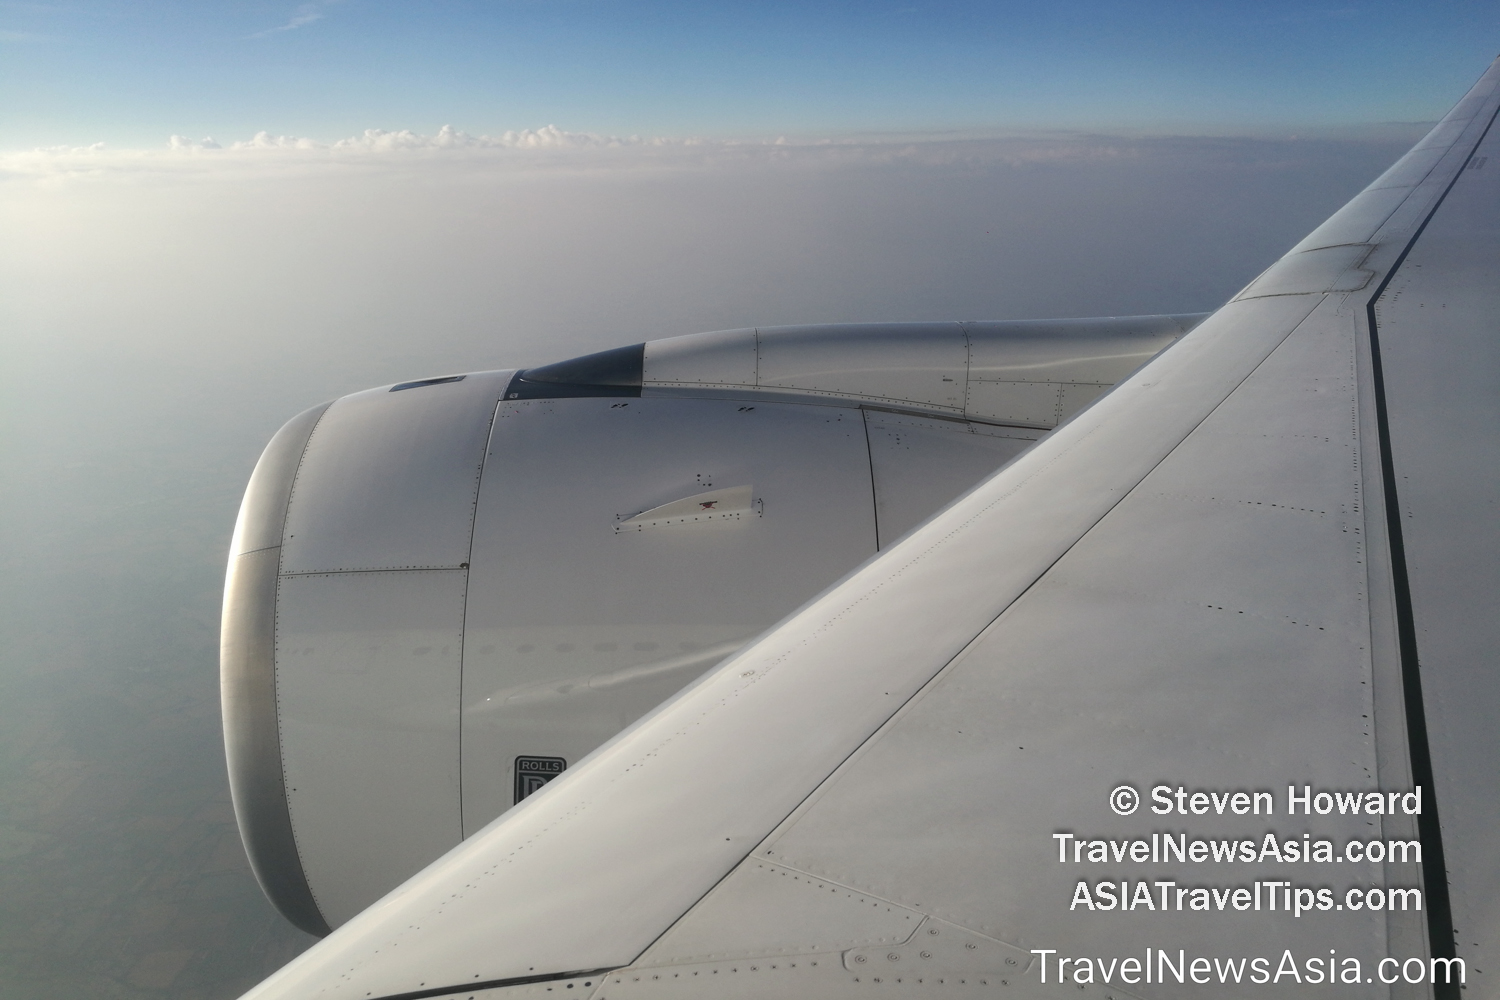 Wing of an Airbus A350-900 and Rolls-Royce engine. Picture by Steven Howard of TravelNewsAsia.com Click to enlarge.